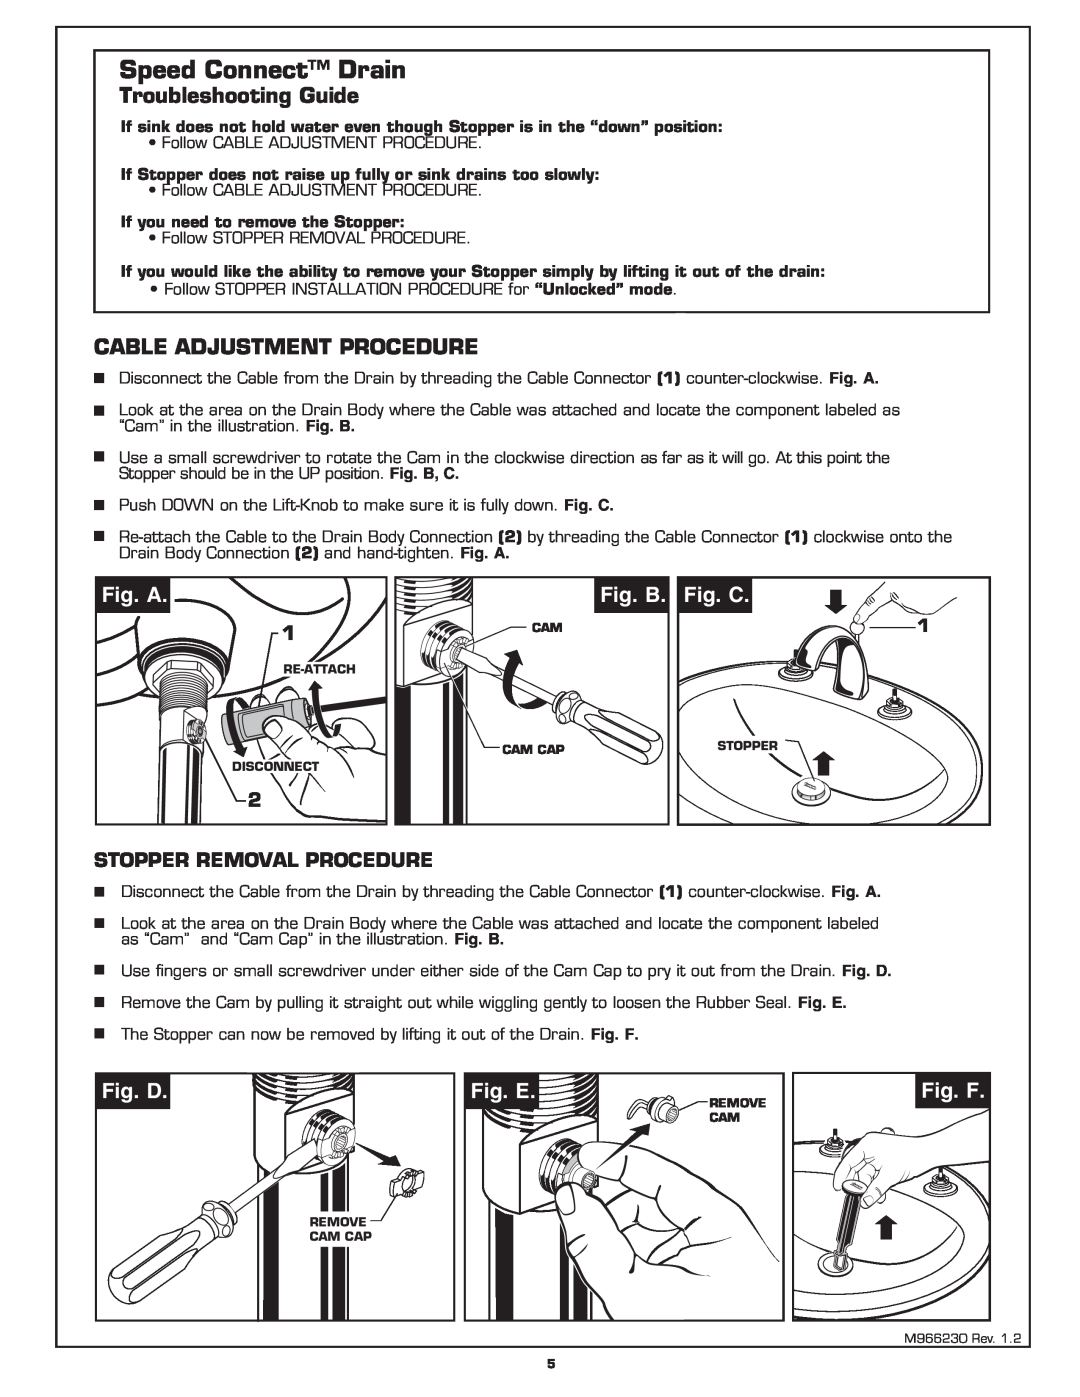 American Standard 8871 Troubleshooting Guide, Cable Adjustment Procedure, Fig. A, Fig. B, Fig. C, Fig. D, Fig. E, Fig. F 